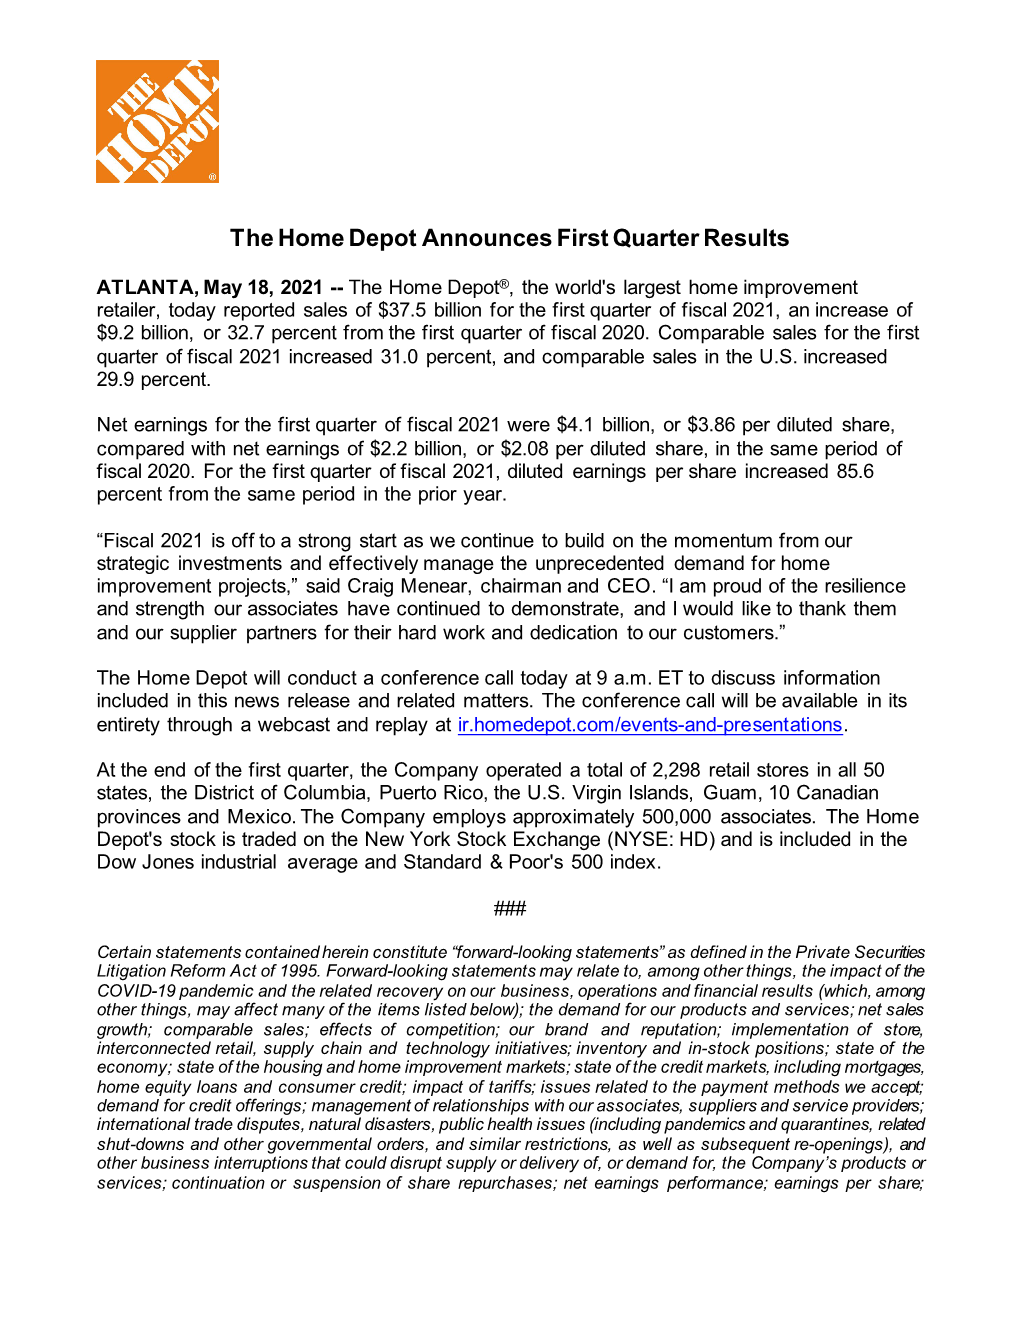 File Q1 2021 Home Depot, Inc. Earnings Release